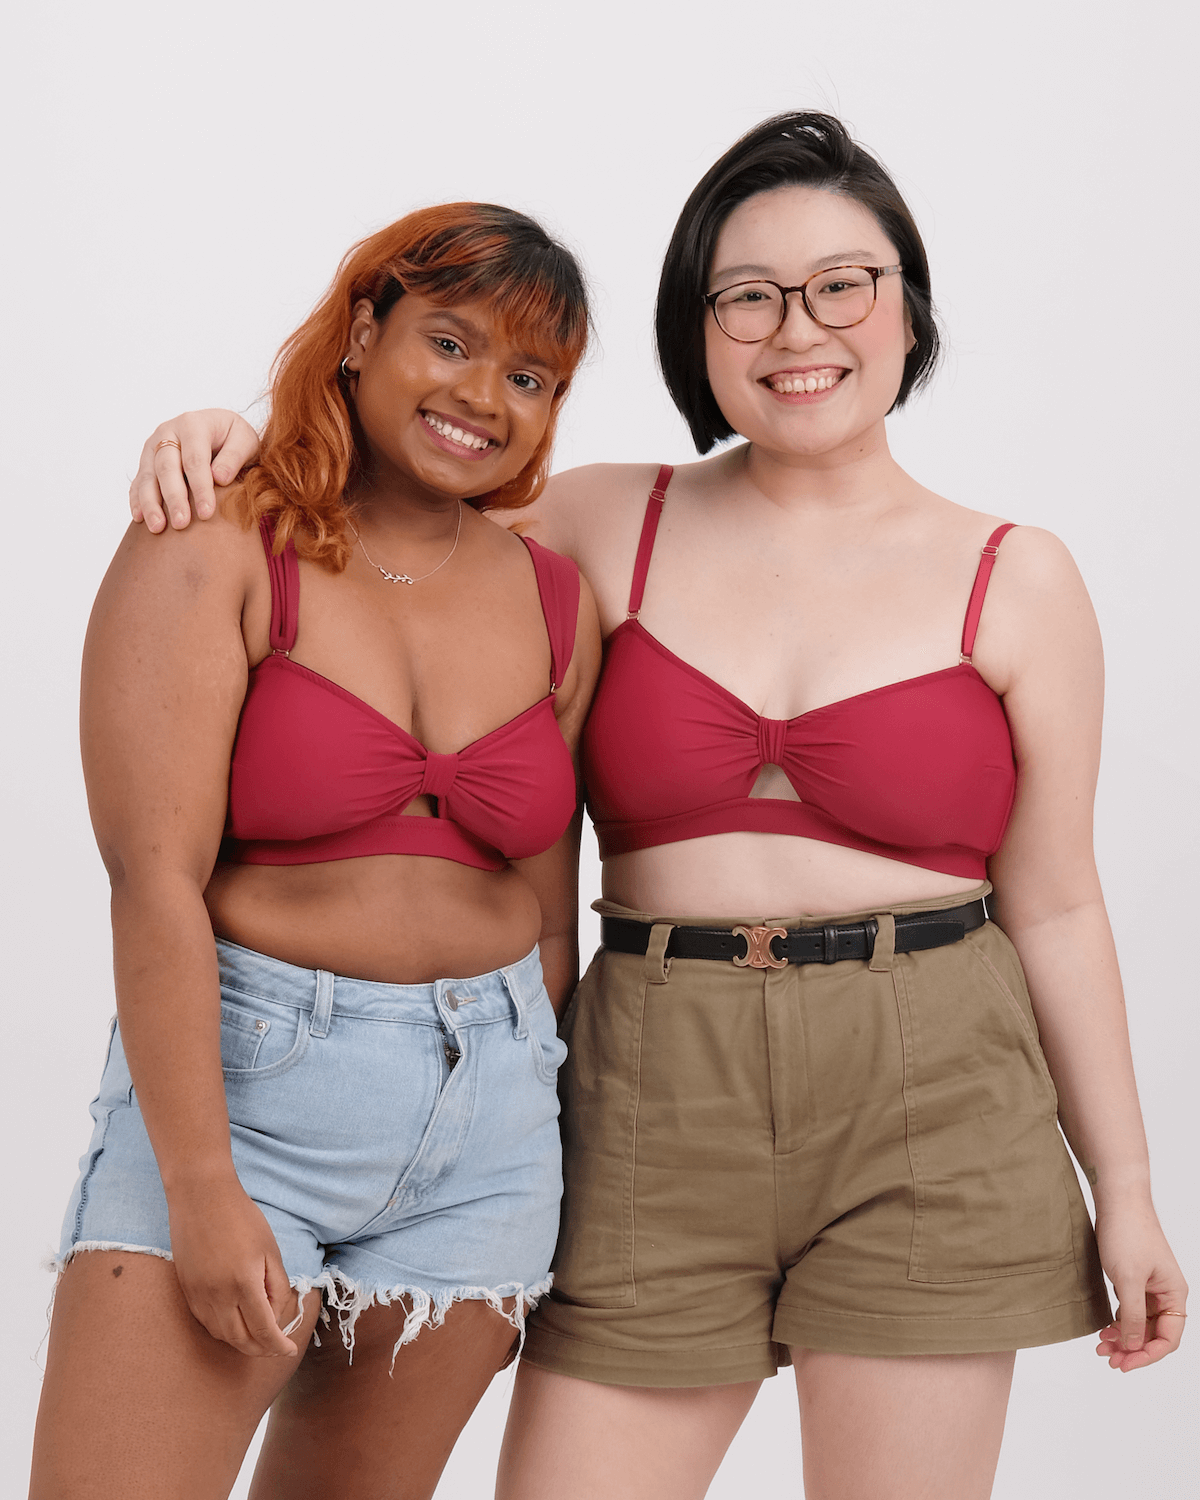 knotty padded strapless bralette in #67 – Our Bralette Club